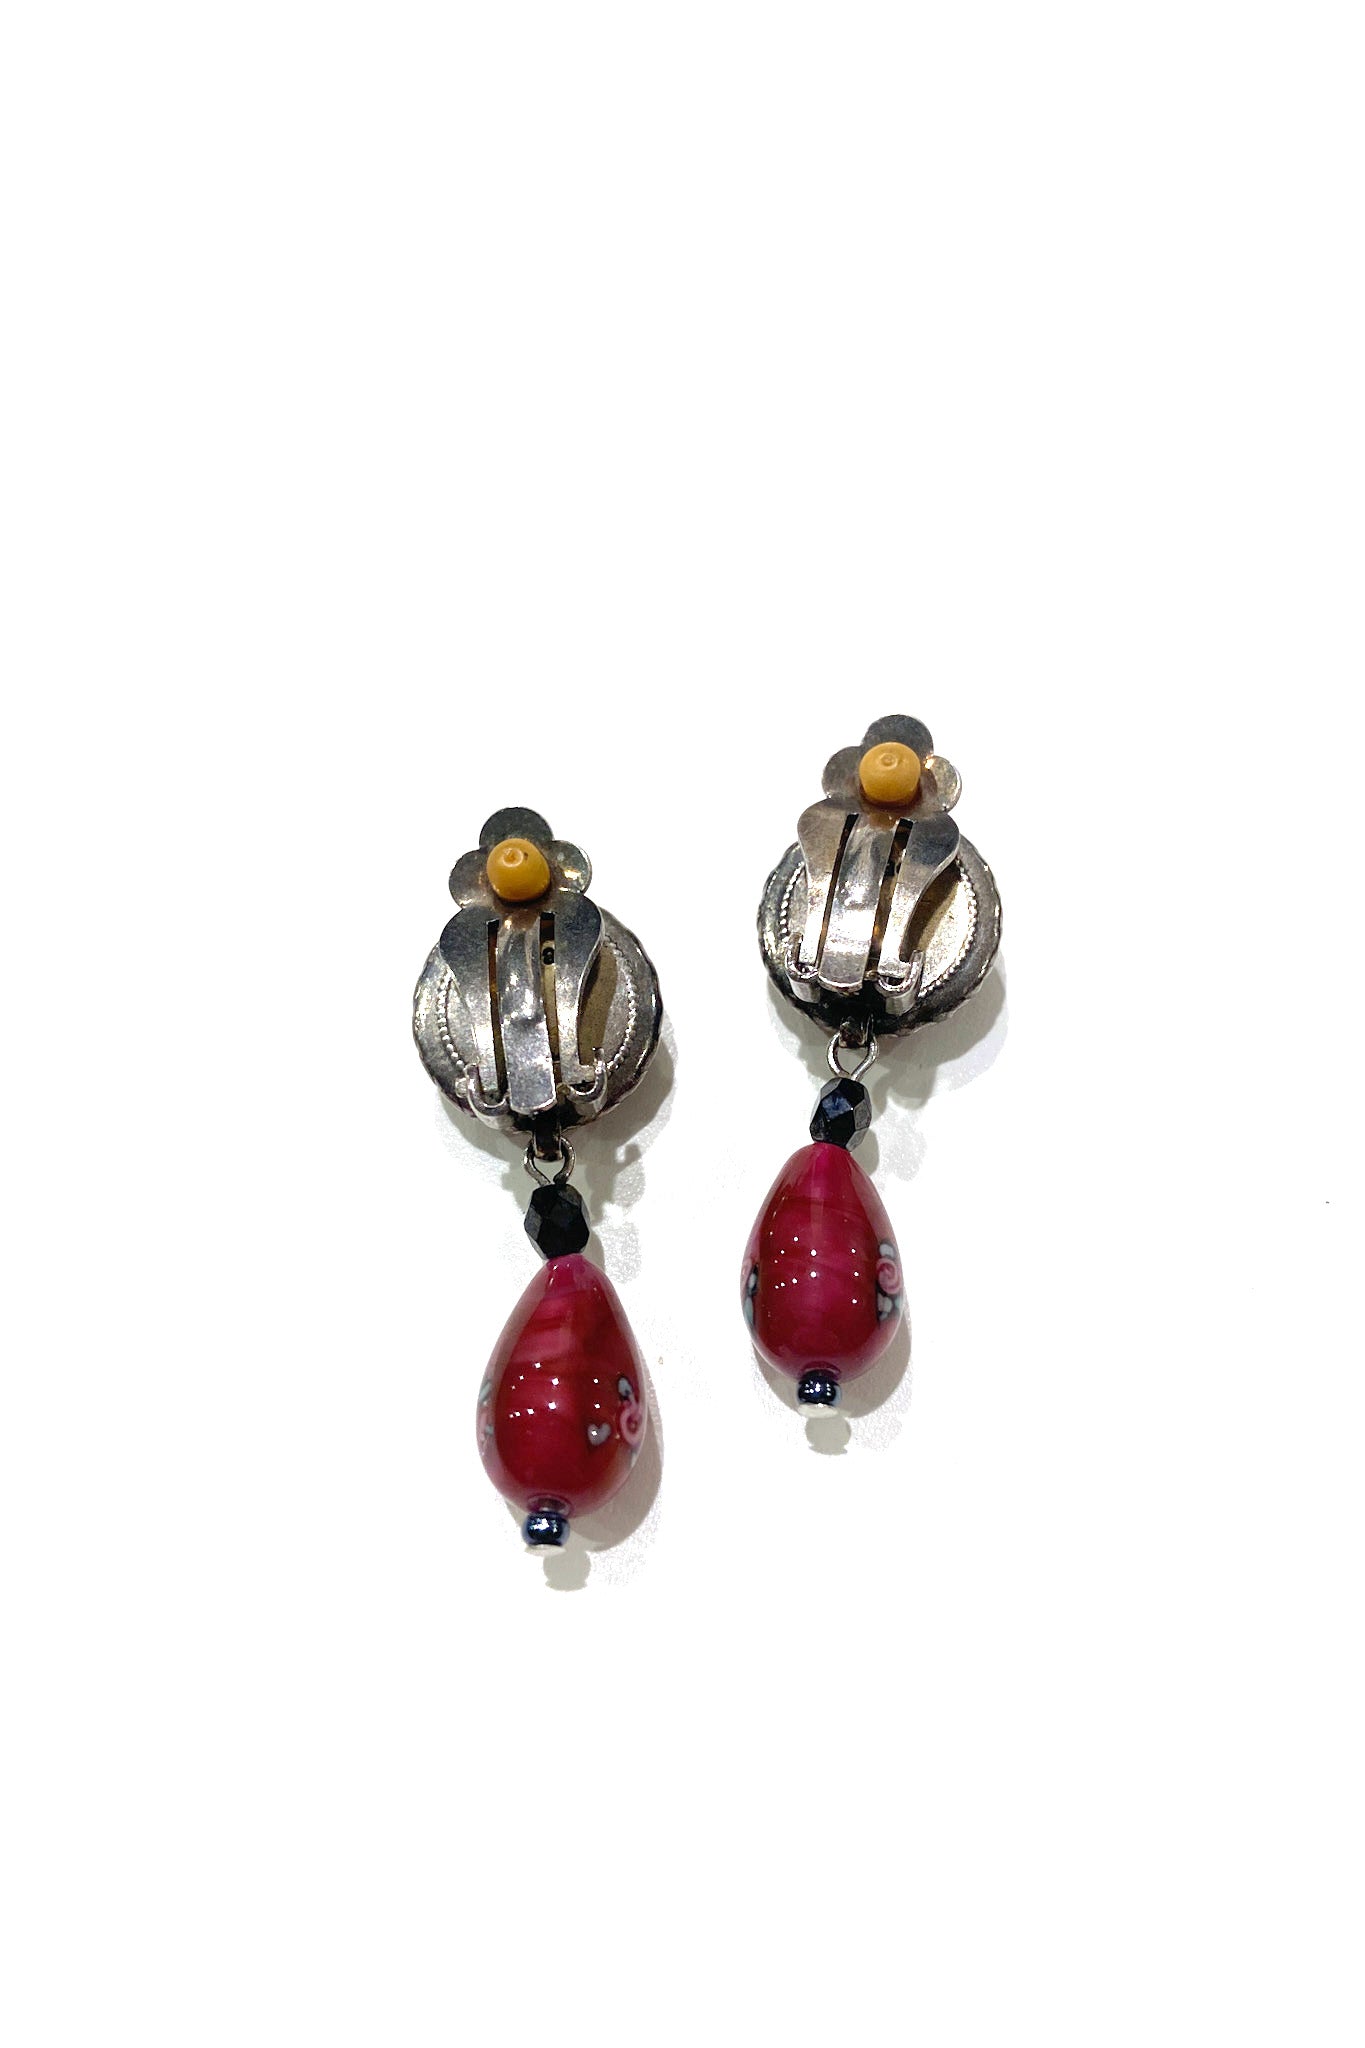 Vintage pink drop earring 優美なラベンダーピンク